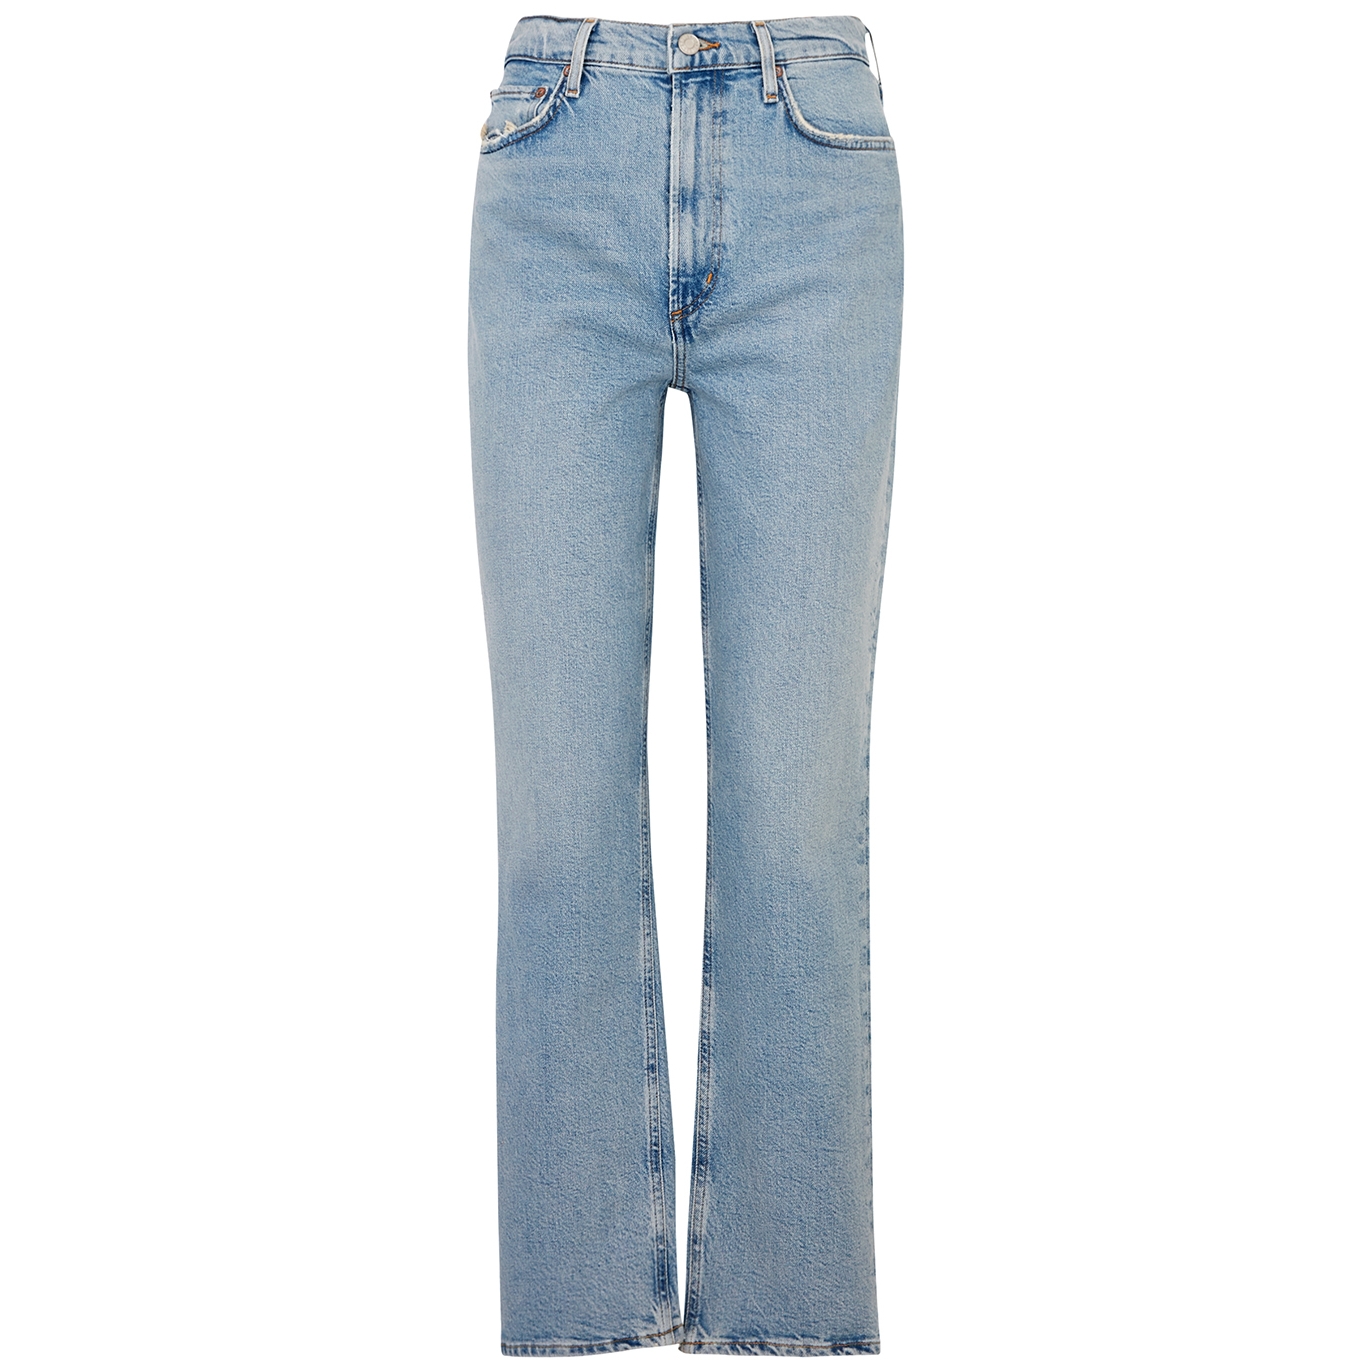 AGOLDE AGOLDE STOVEPIPE STRAIGHT-LEG JEANS